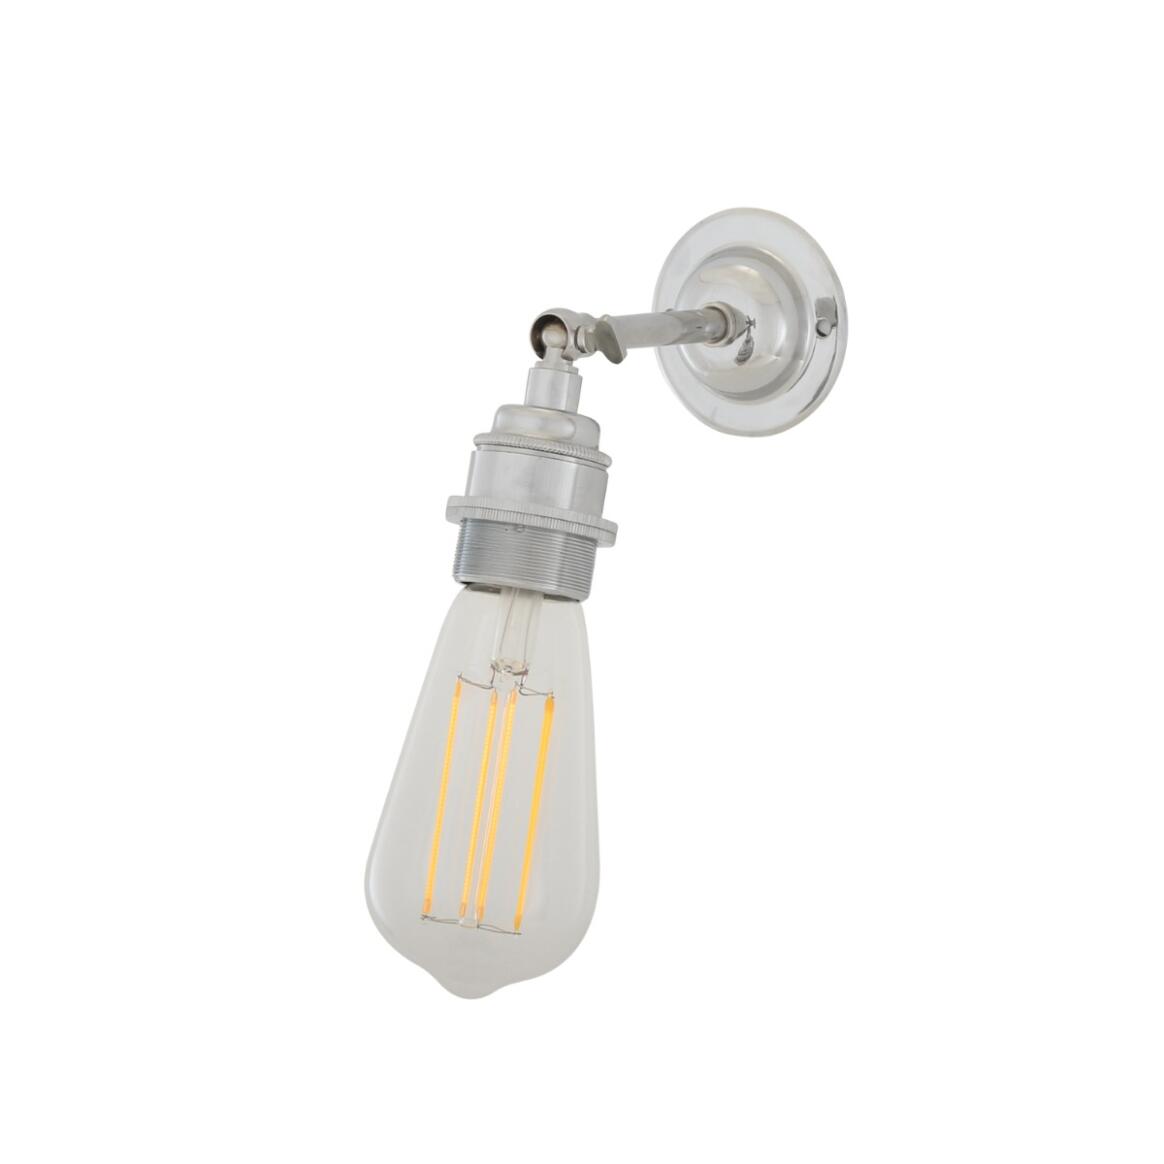 Lome Vintage Bare Bulb Wall Light with Swivel main product image